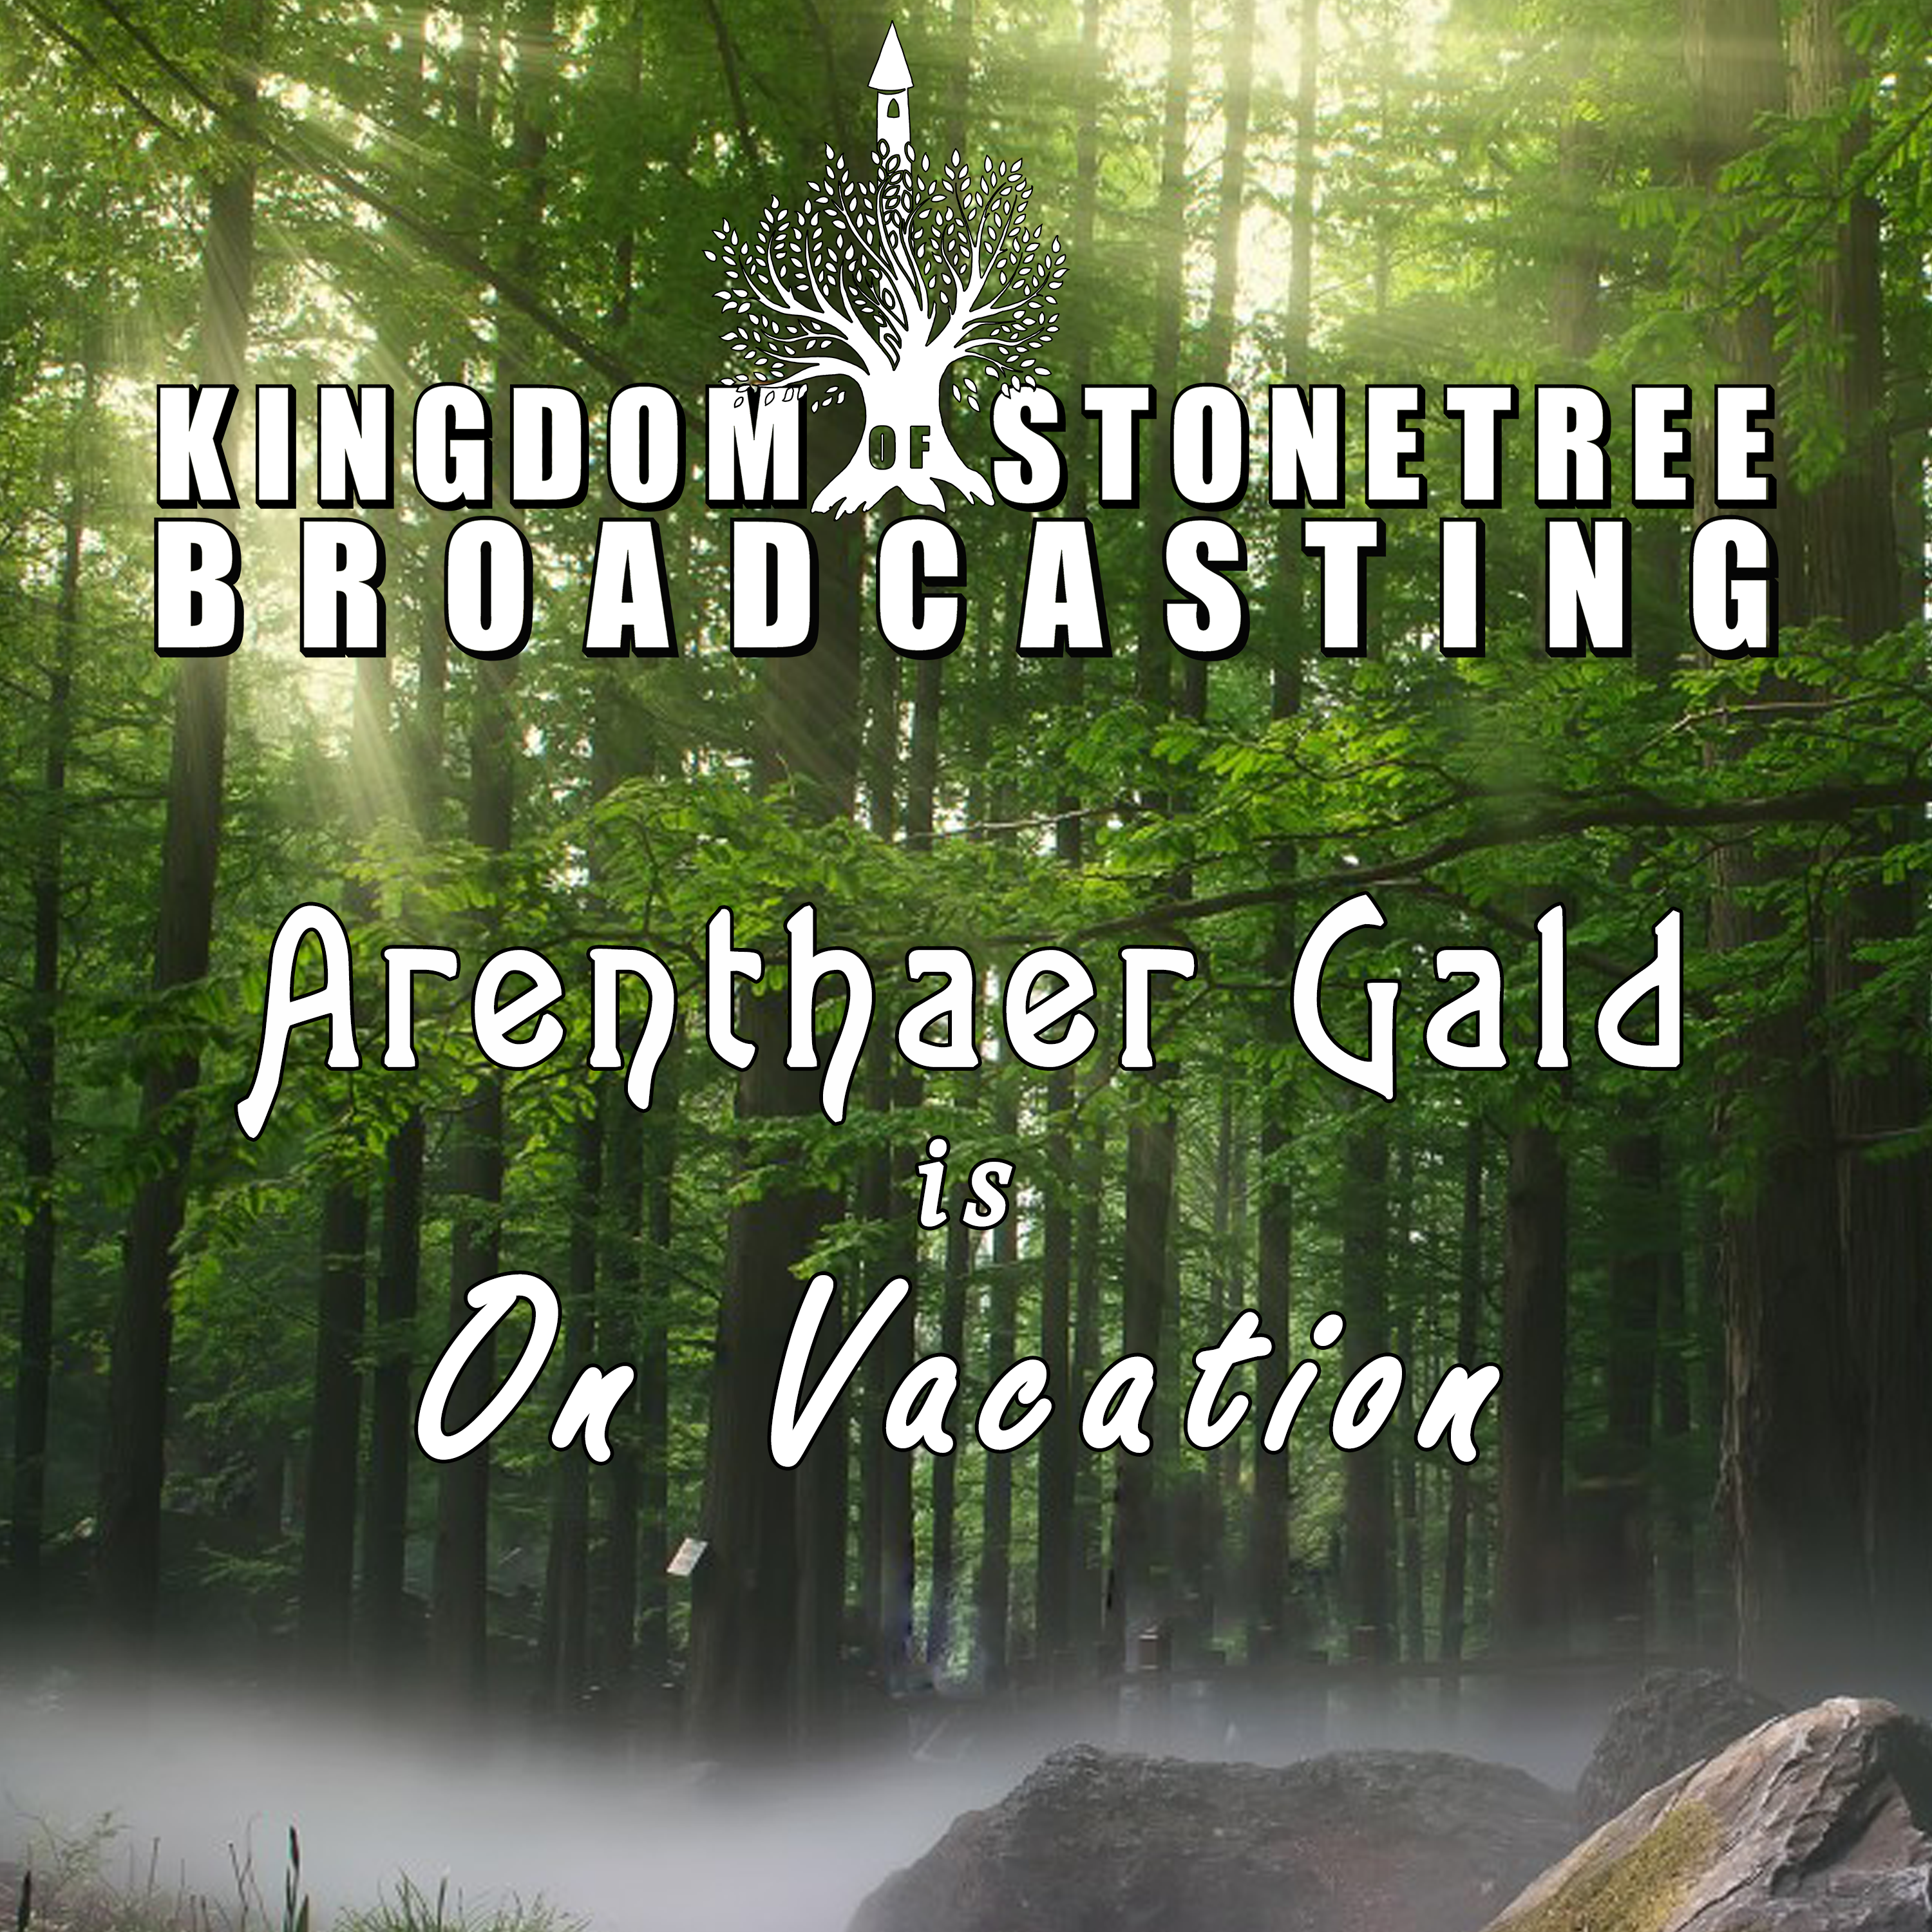 Arenthaer Gald on Vacation: Treehouse Resort